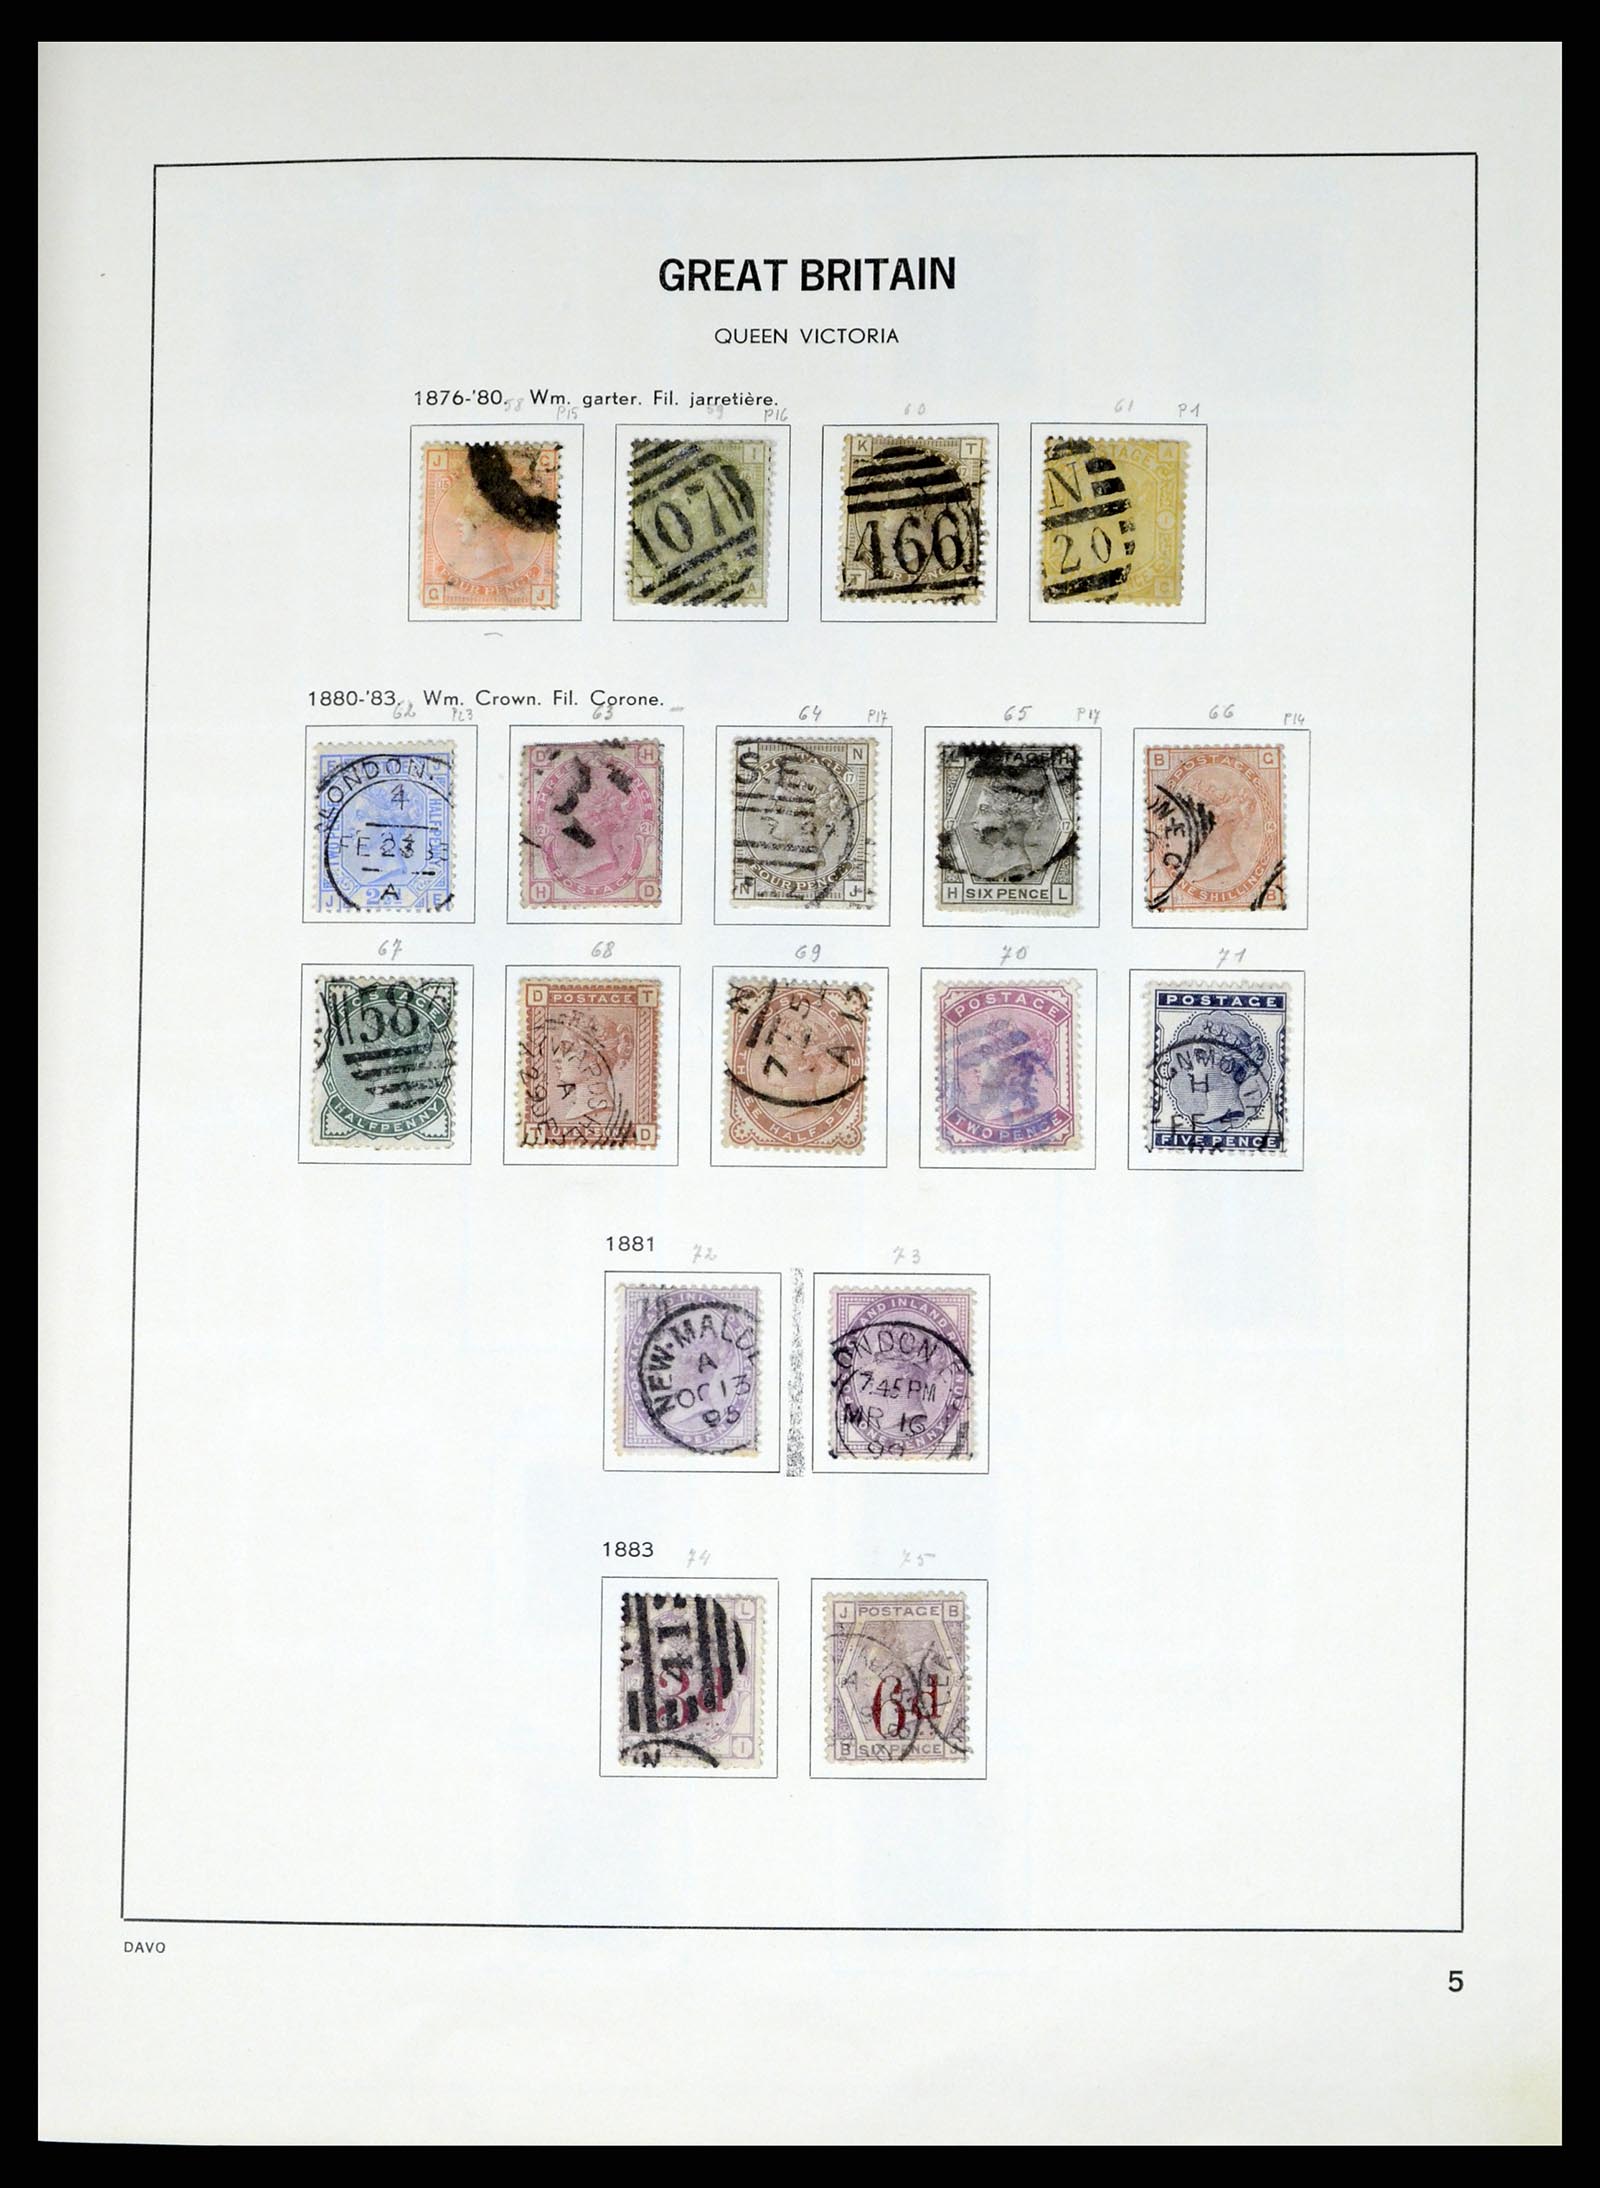 37375 027 - Stamp collection 37375 Great Britain 1840-1982.